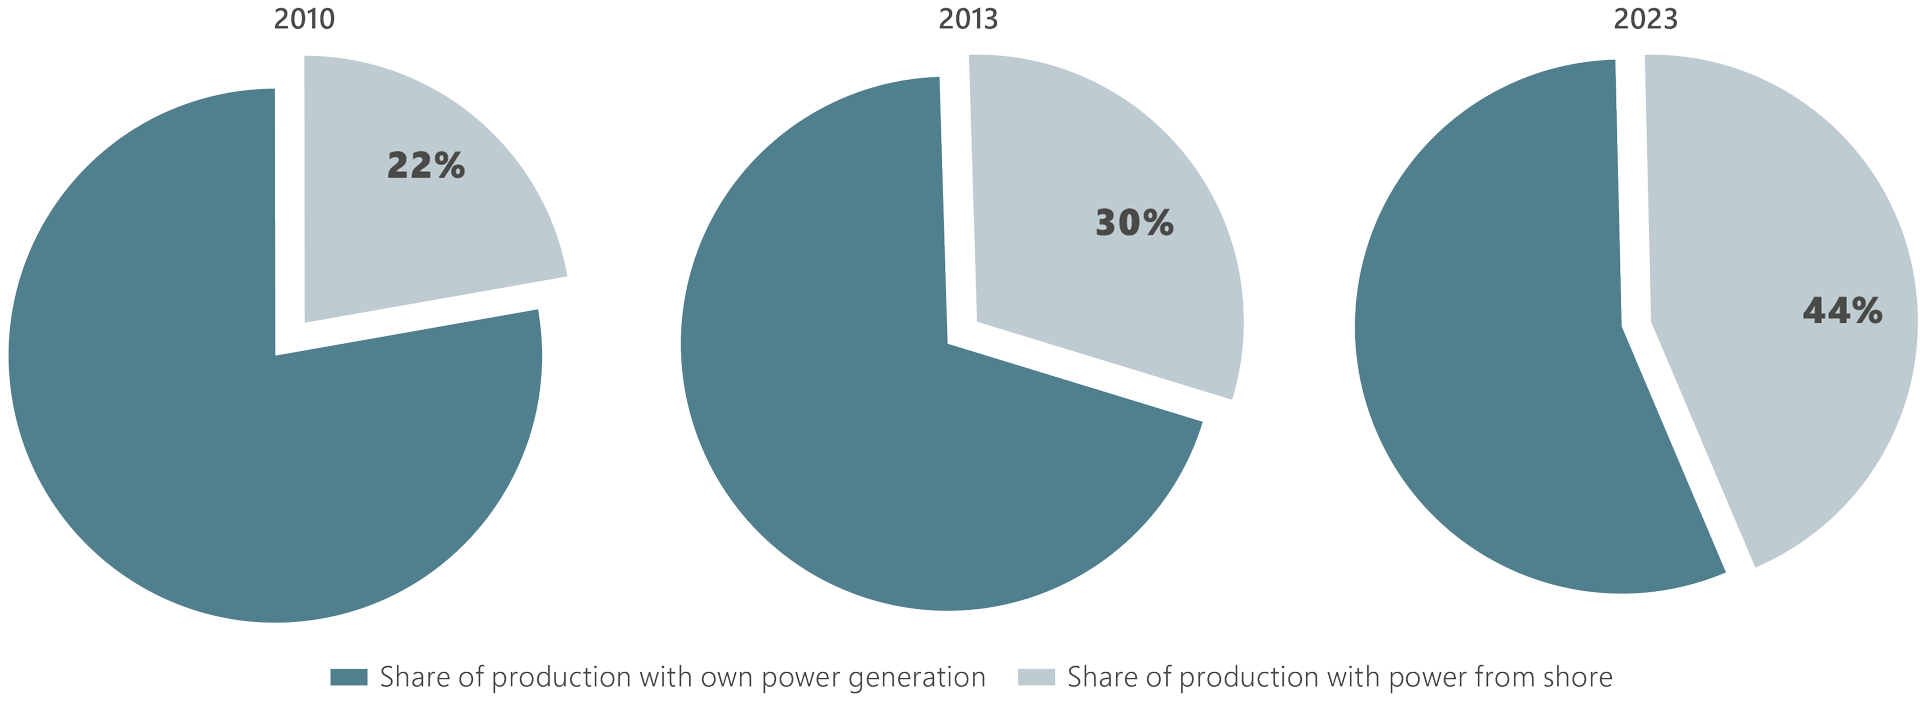 Several pie charts that shows the percentage of the production that was driven by power from shore in 2010 and 2013, including a prediction for 2023